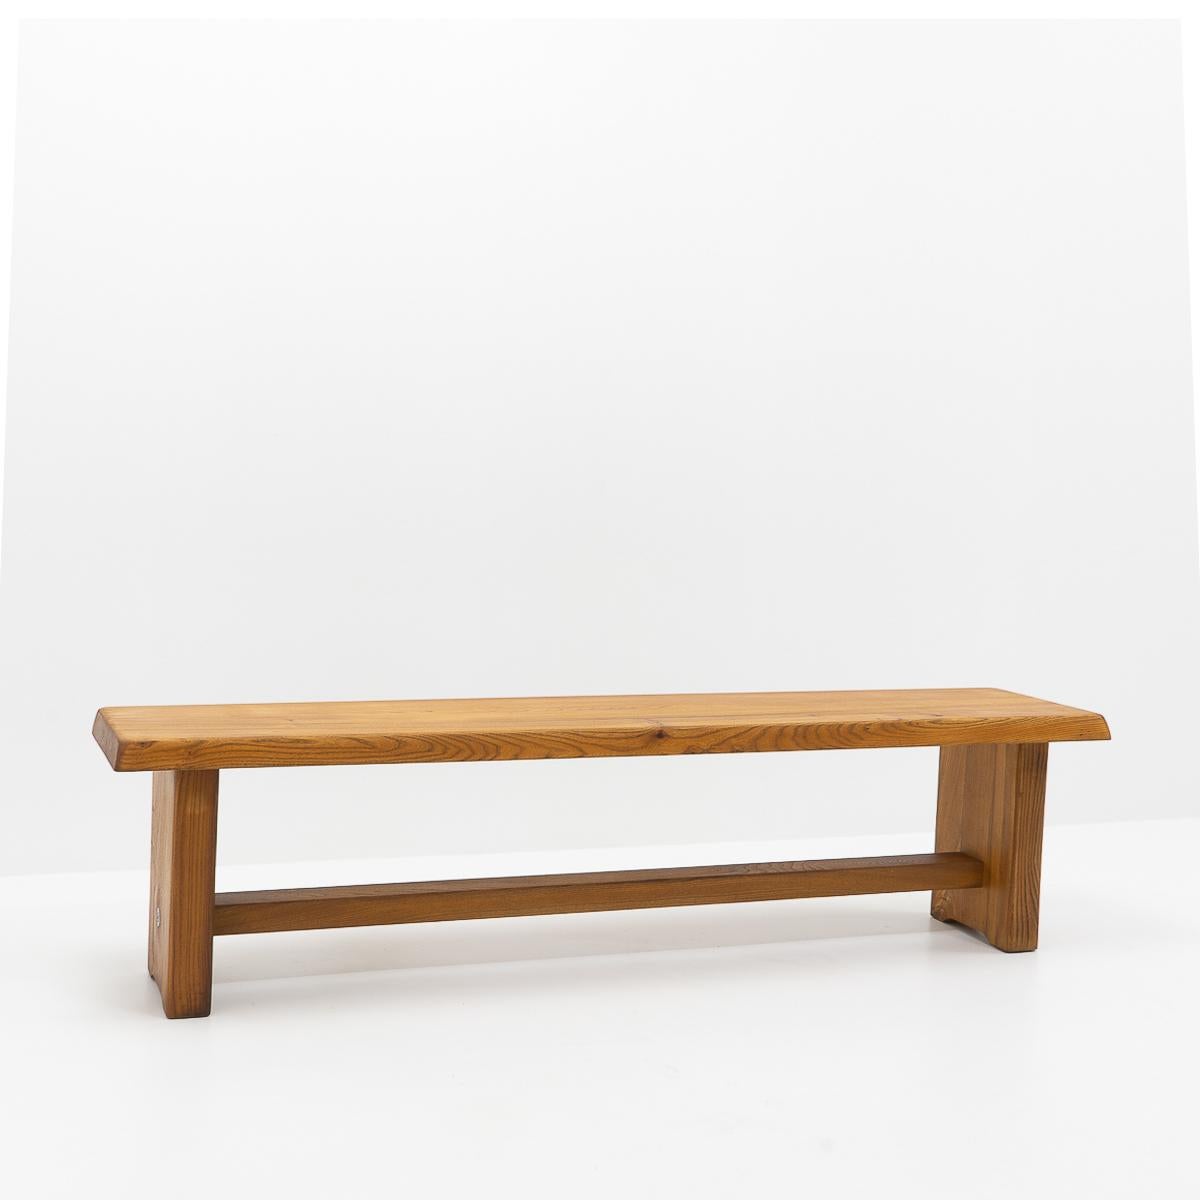 French Design Classic: Pierre Chapo, S14 Benches, 1980s For Sale 3